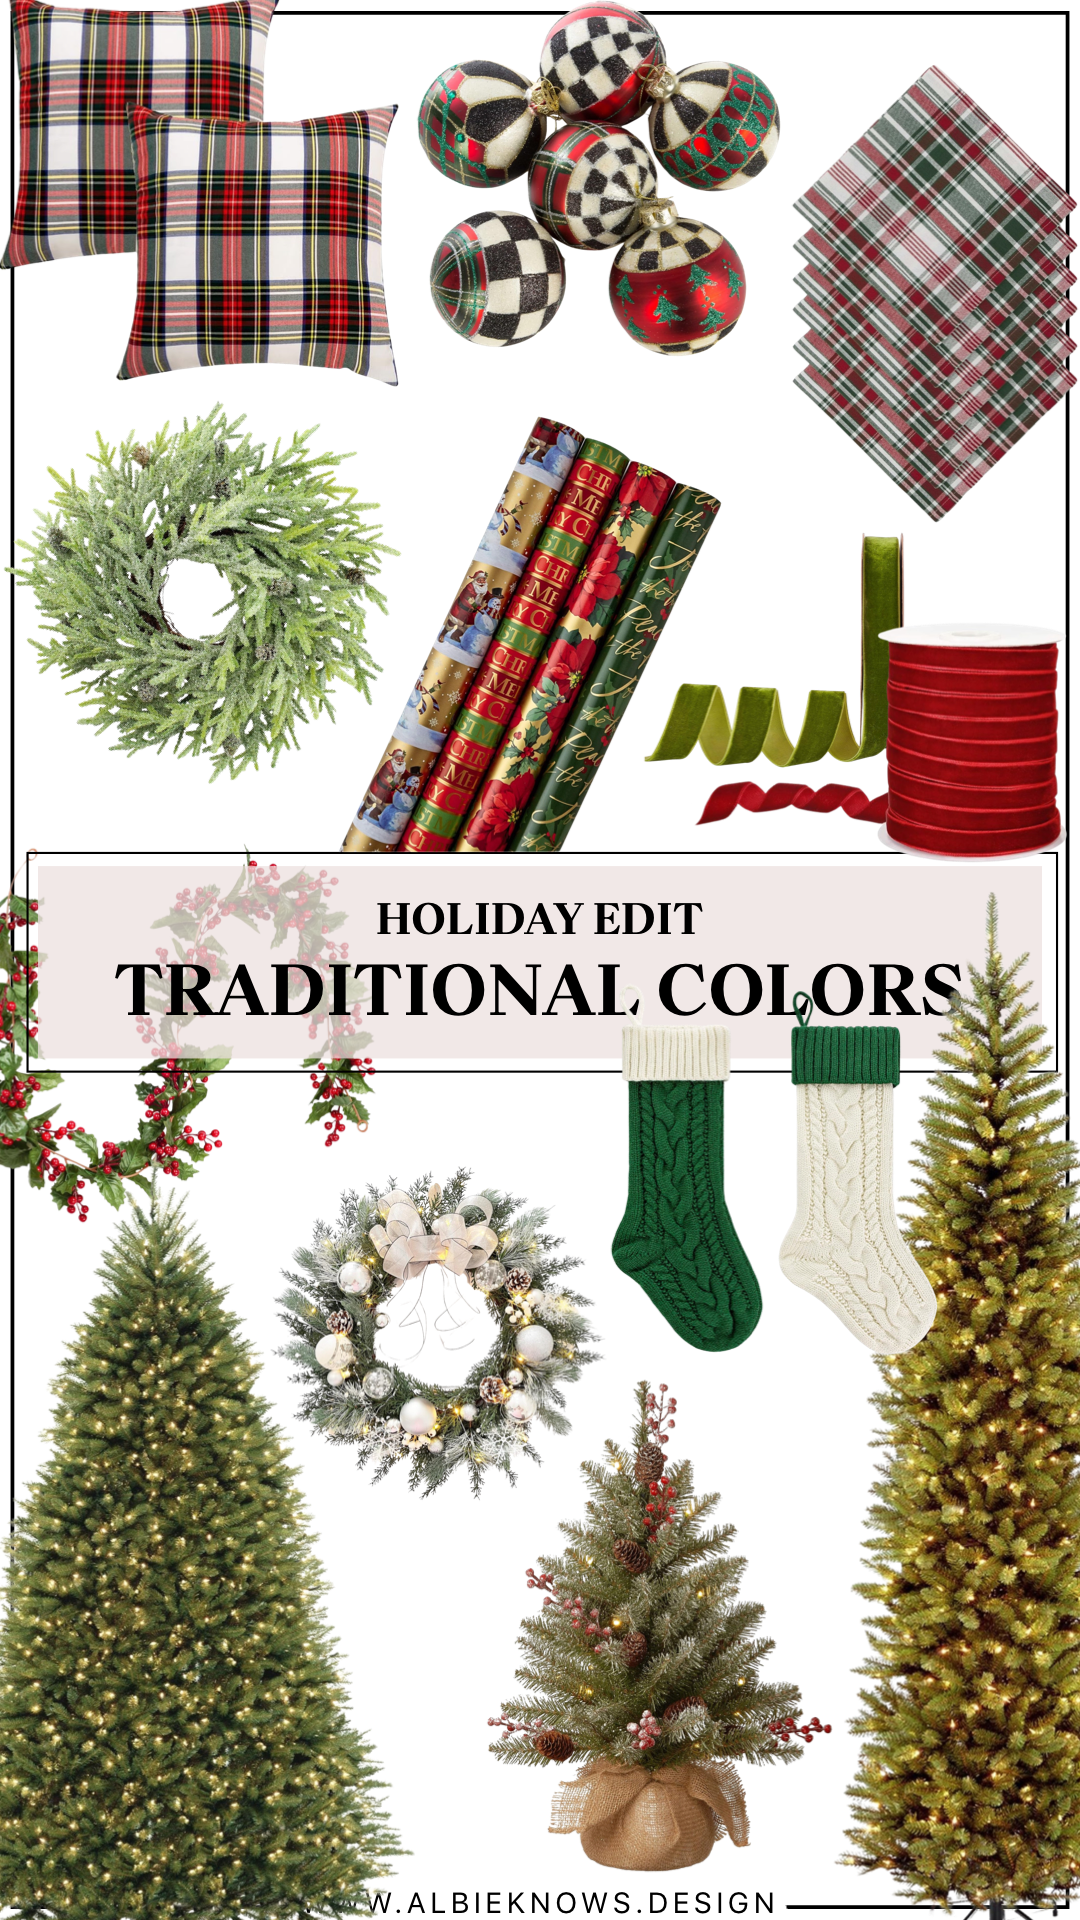 Holiday Edit: Traditional Colors